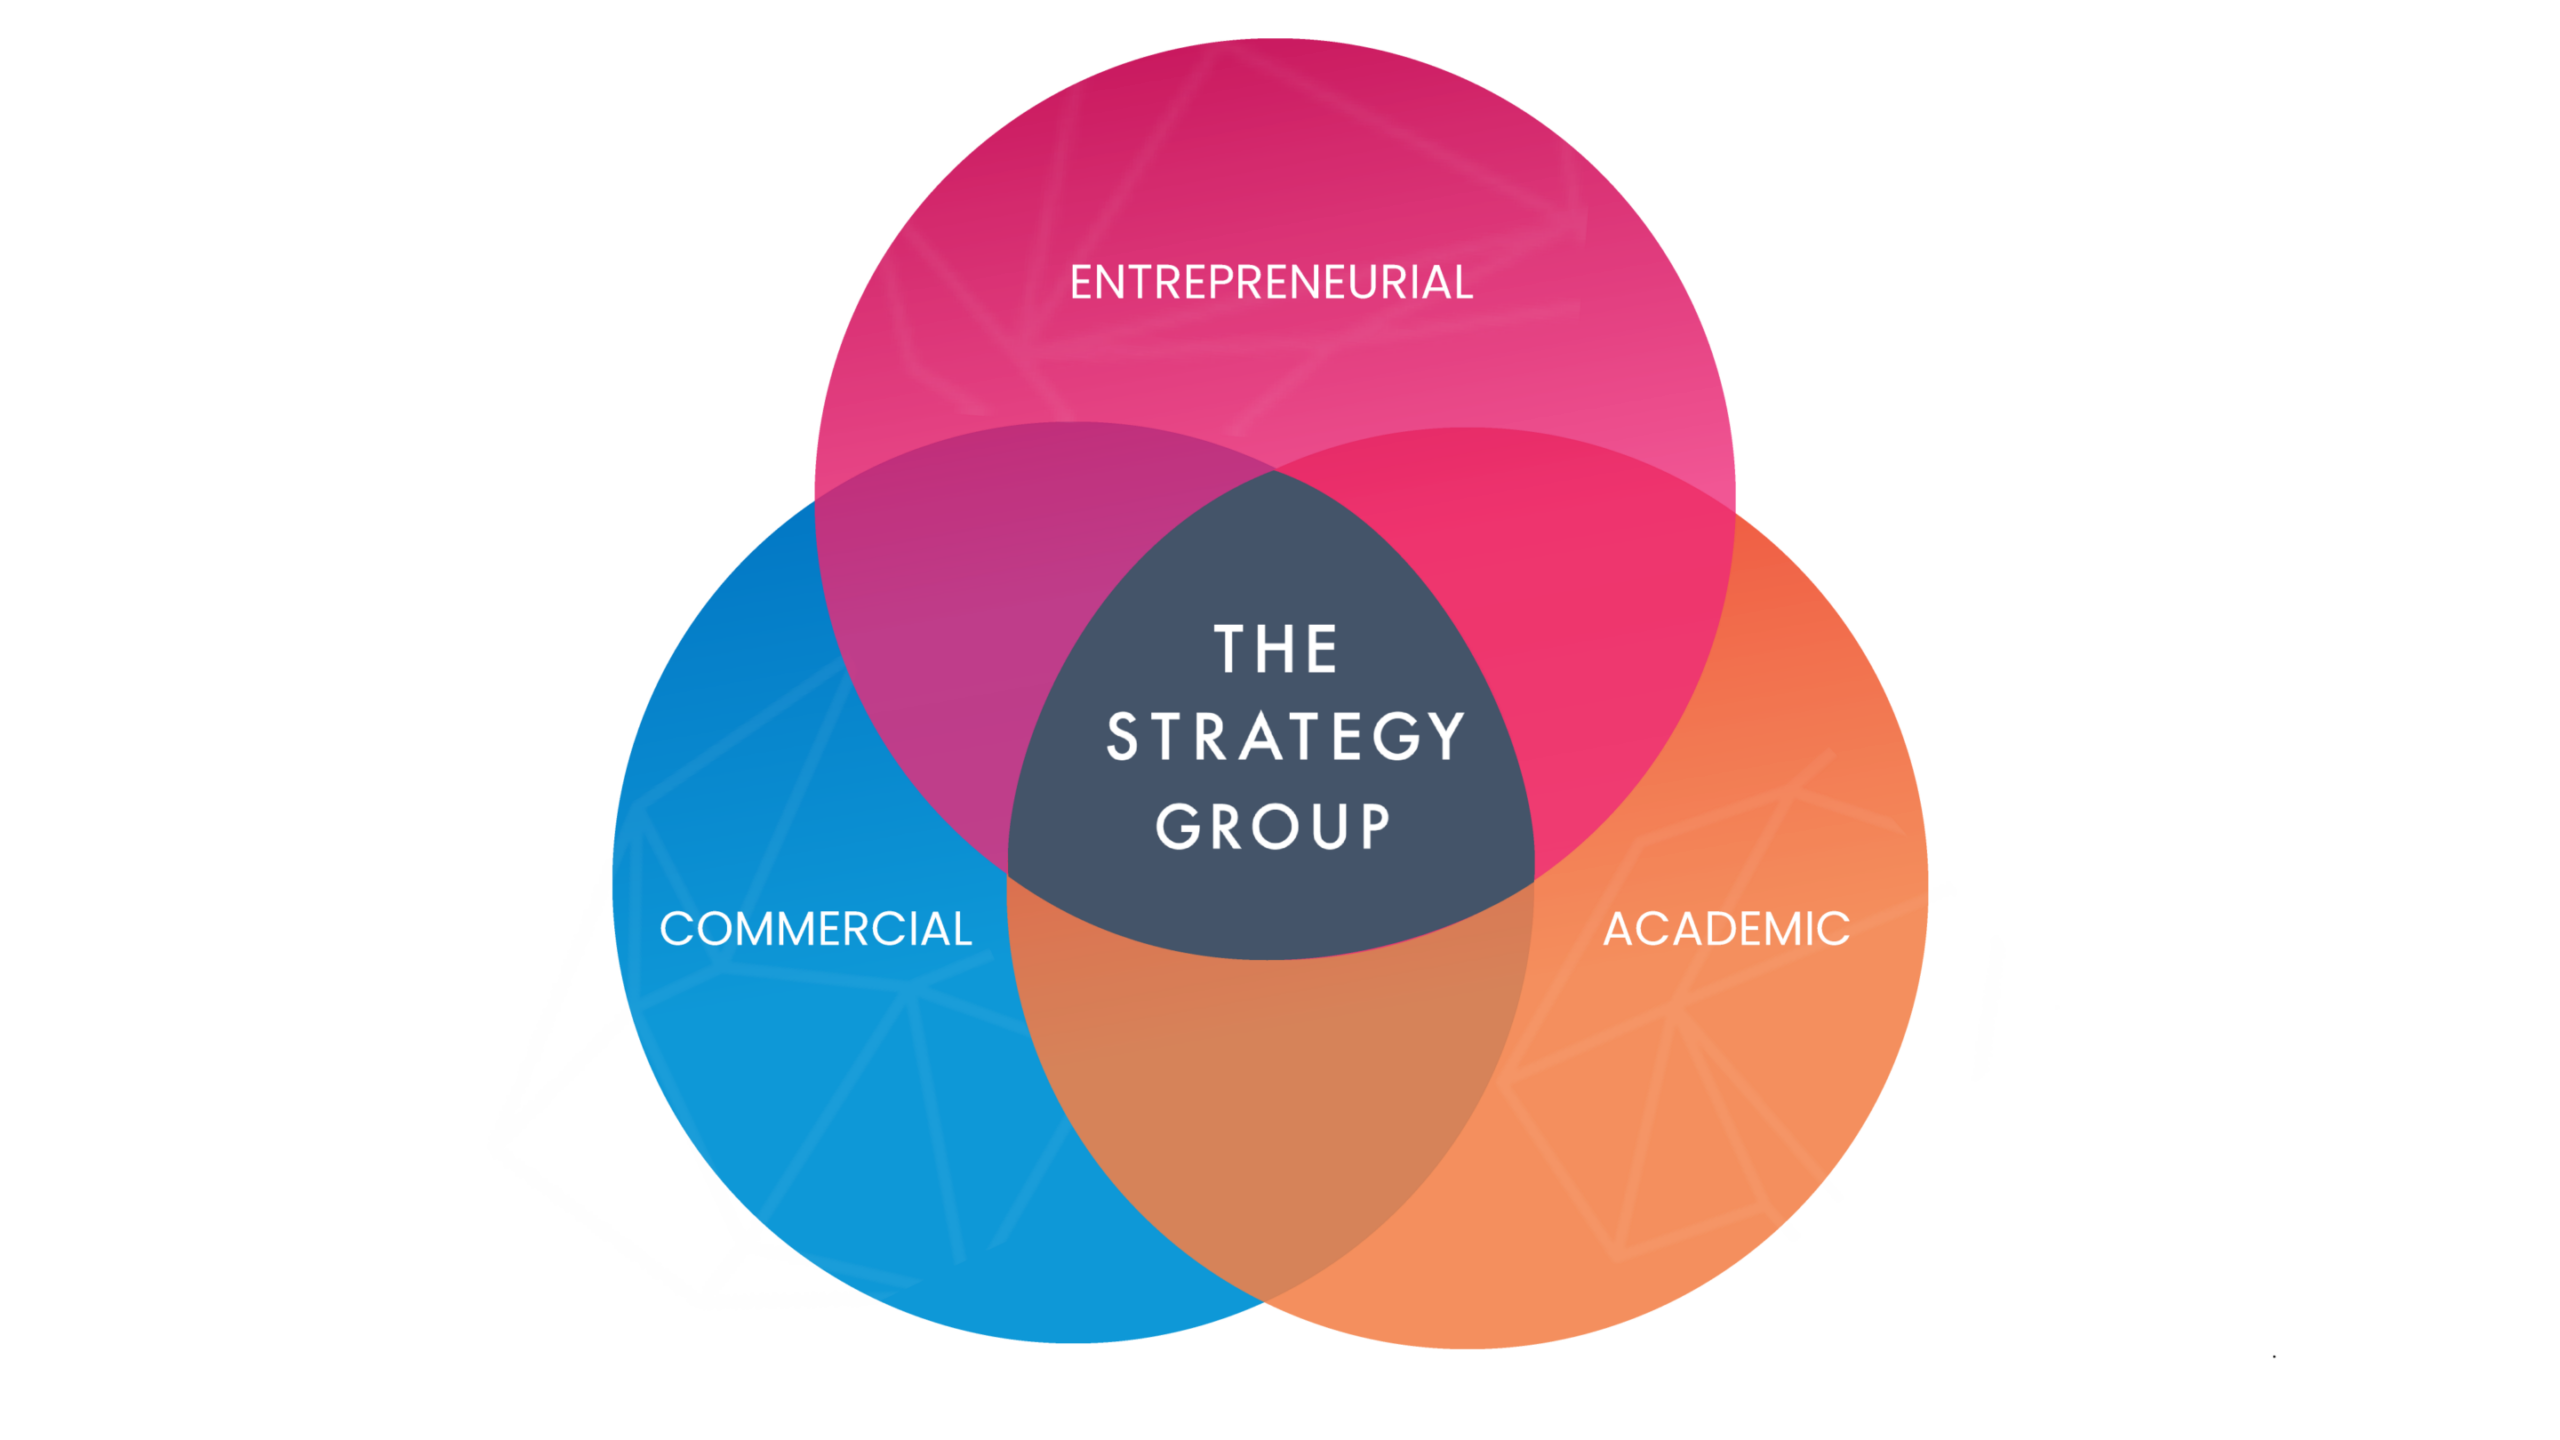 The Strategy Group Unique Perspective